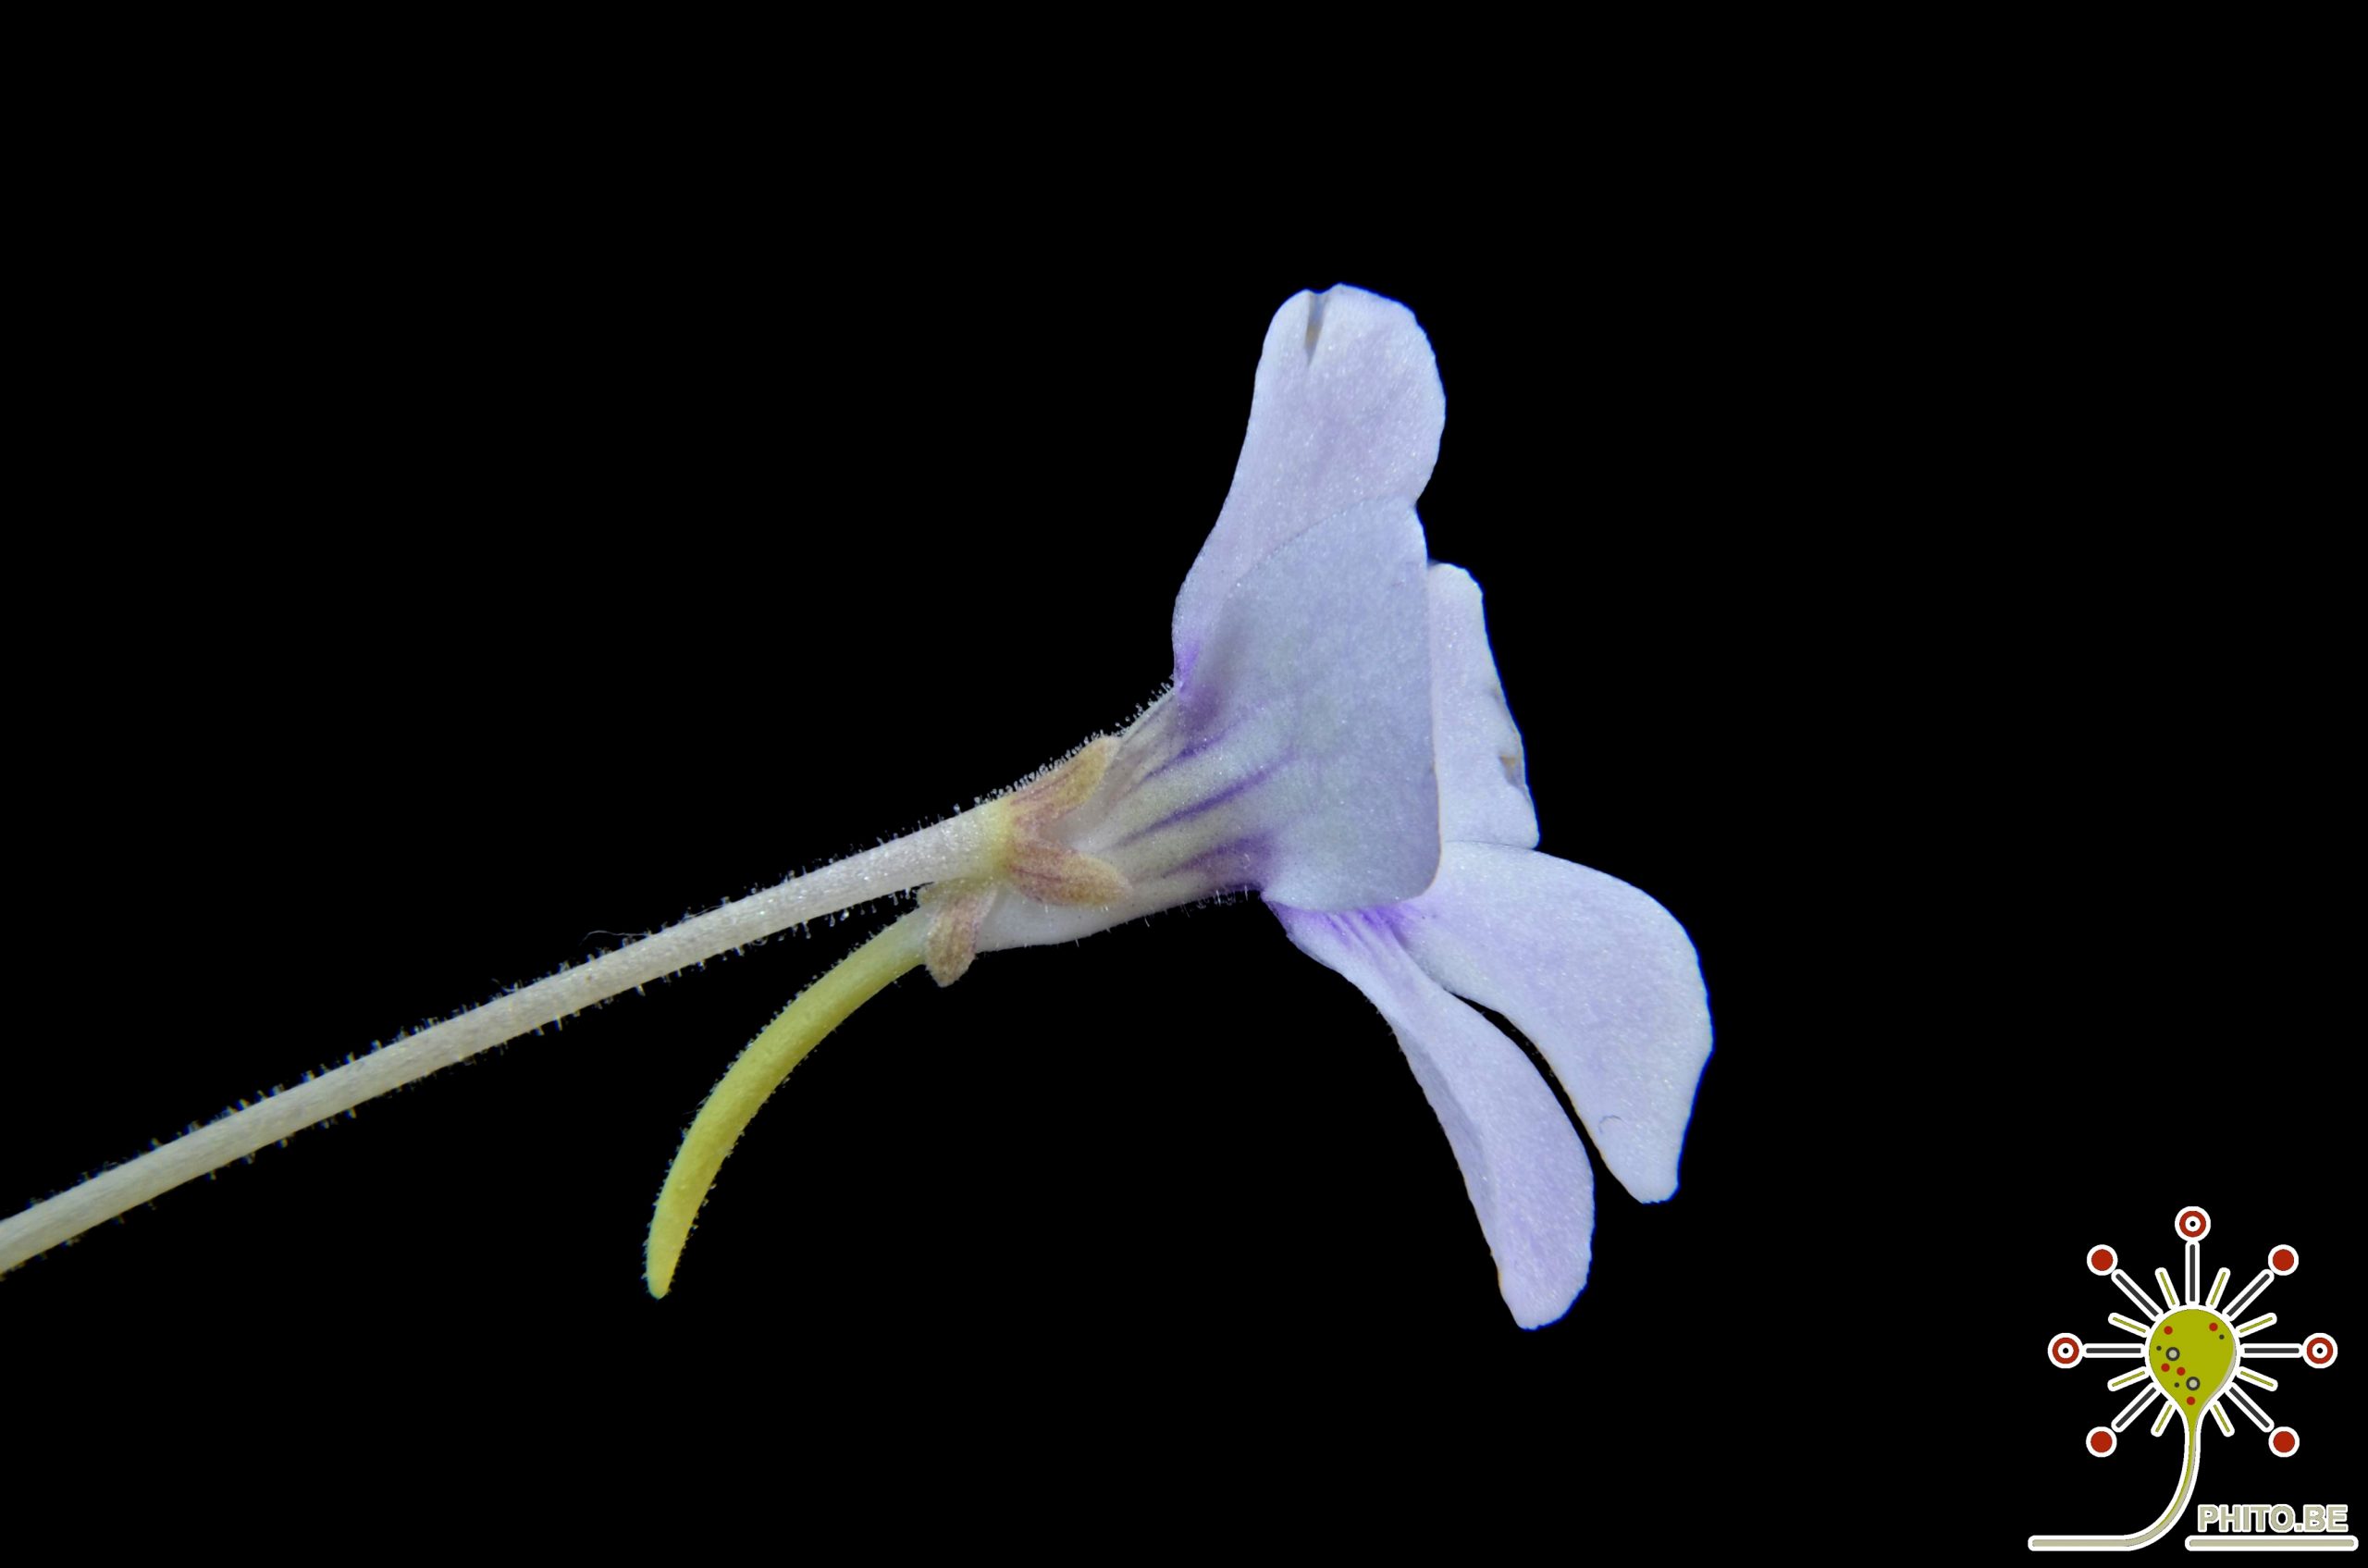 How to pollinate Pinguicula flowers